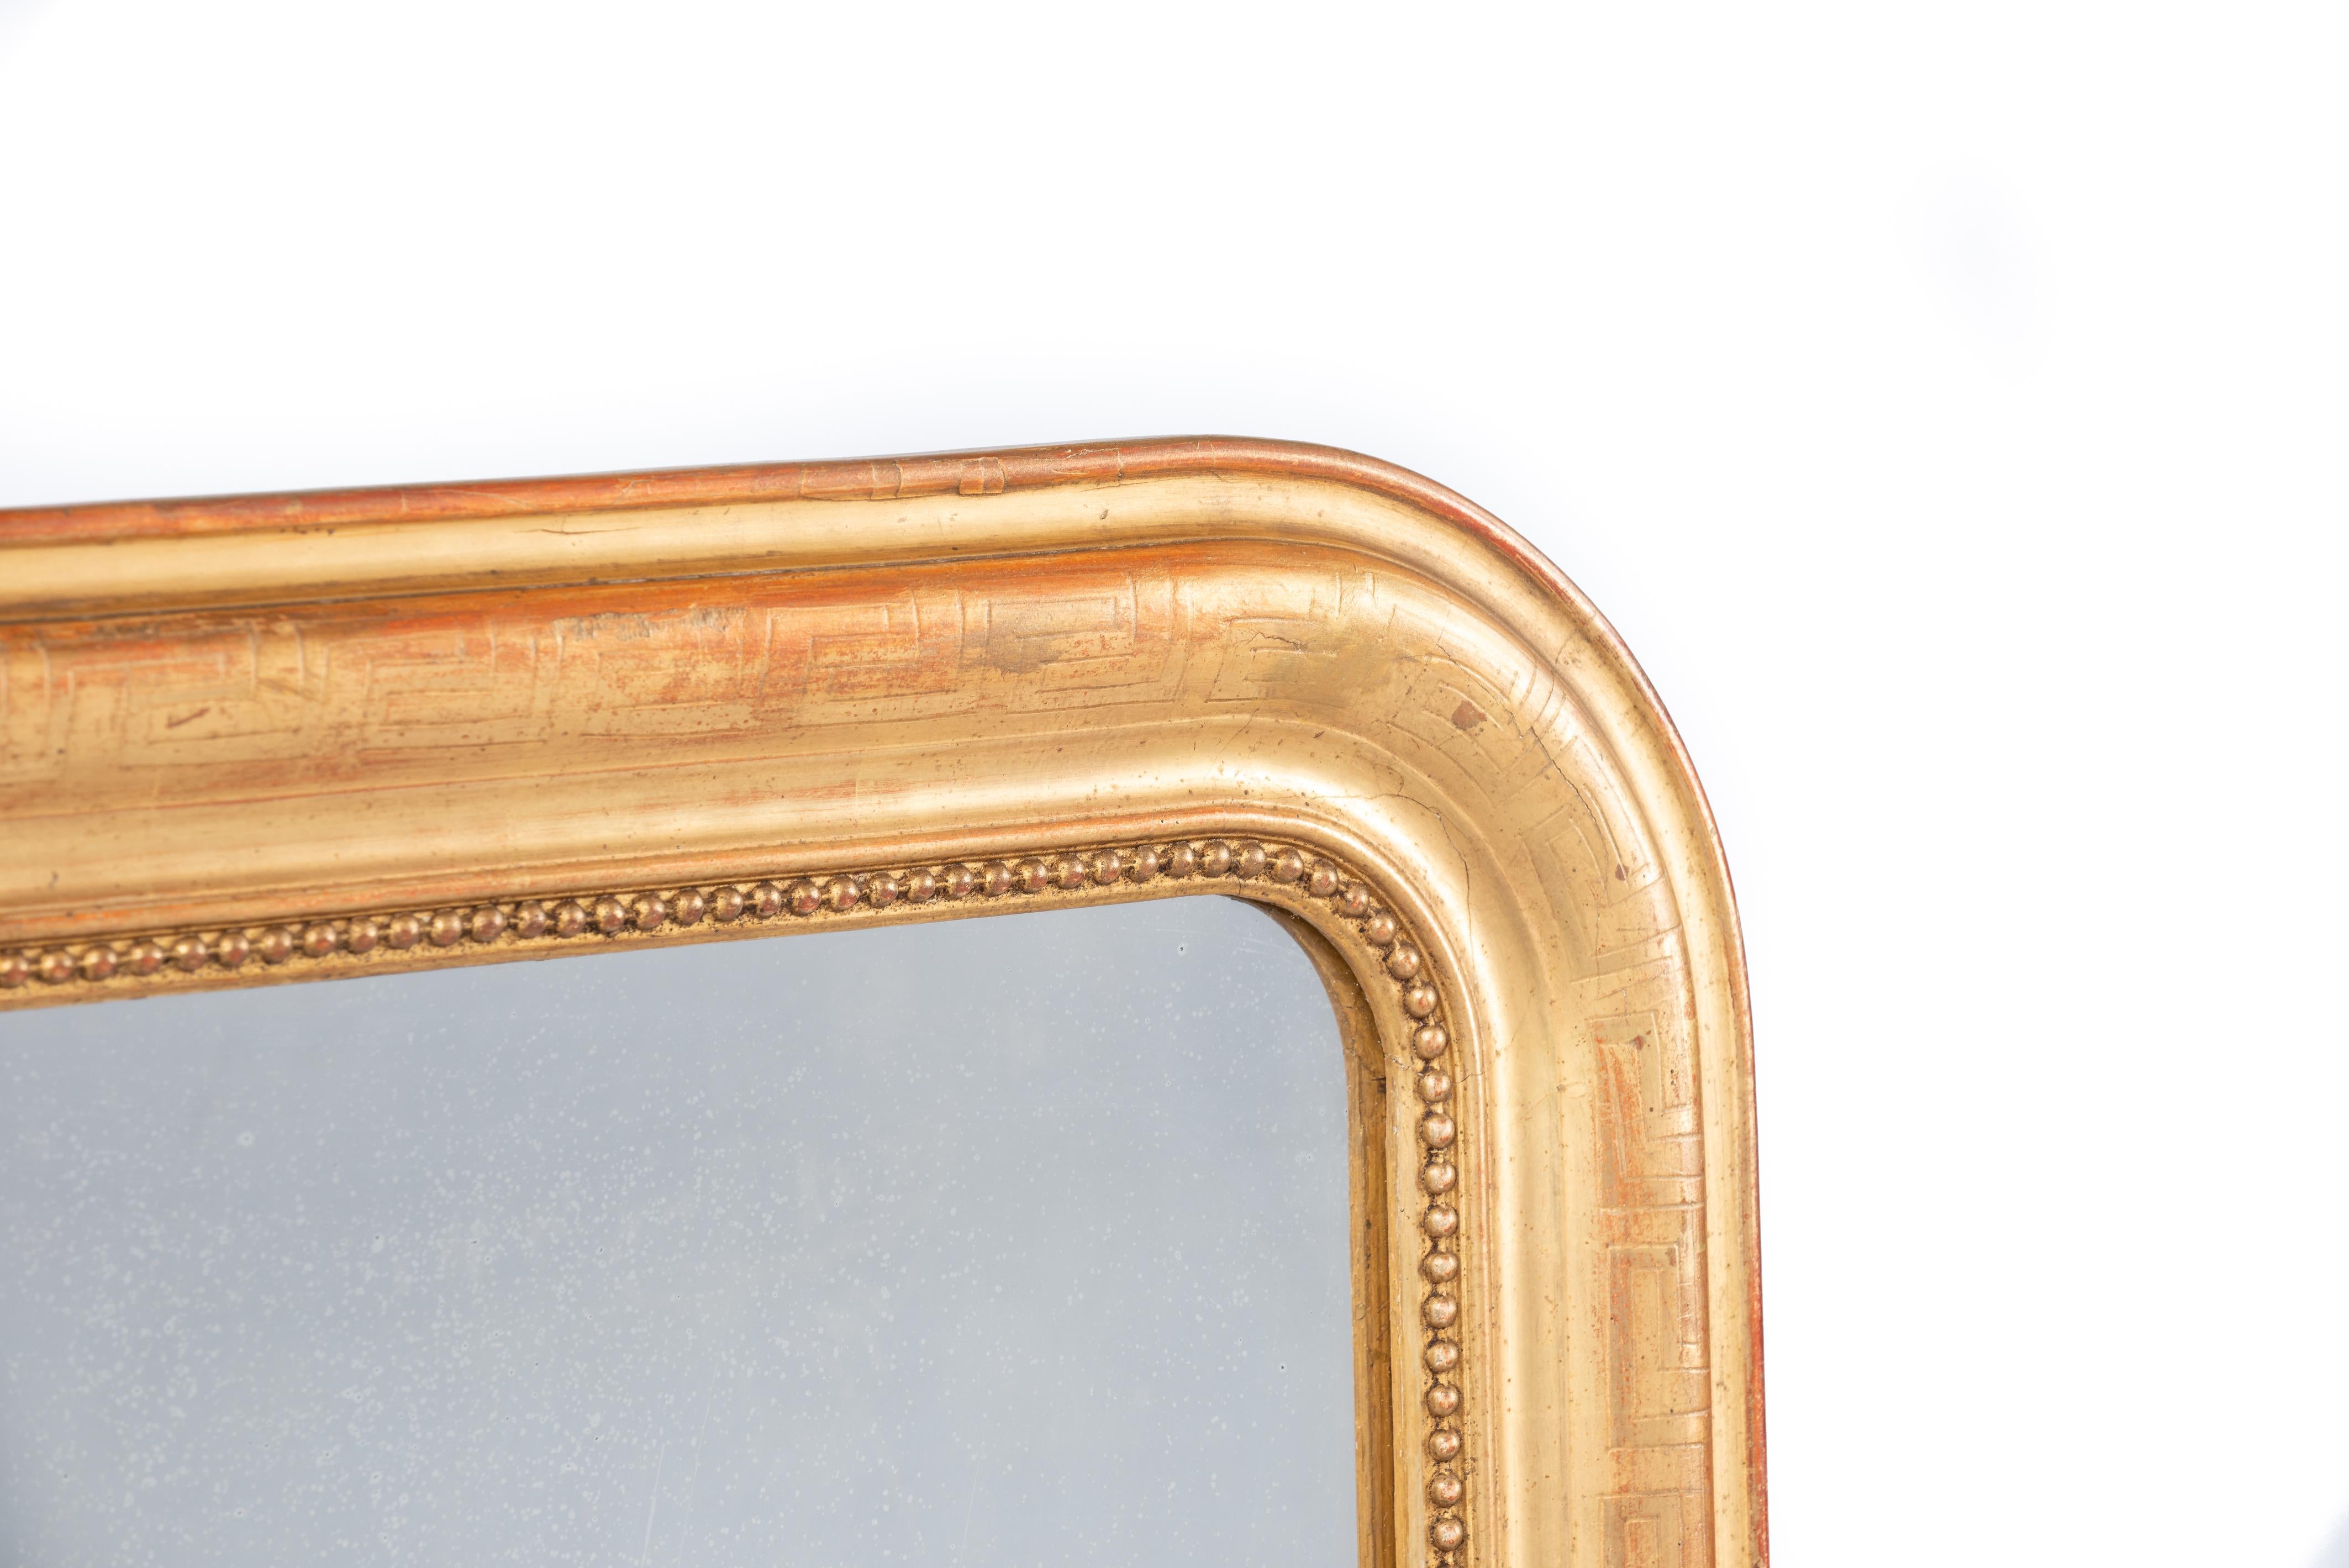 On offer here is a beautiful gold leaf gilt French mirror that was made in the late 19th century, circa 1880. It has the upper rounded corners typical for the Louis Philippe style. The mirror frame has an elegant pearl beading surrounding the glass.